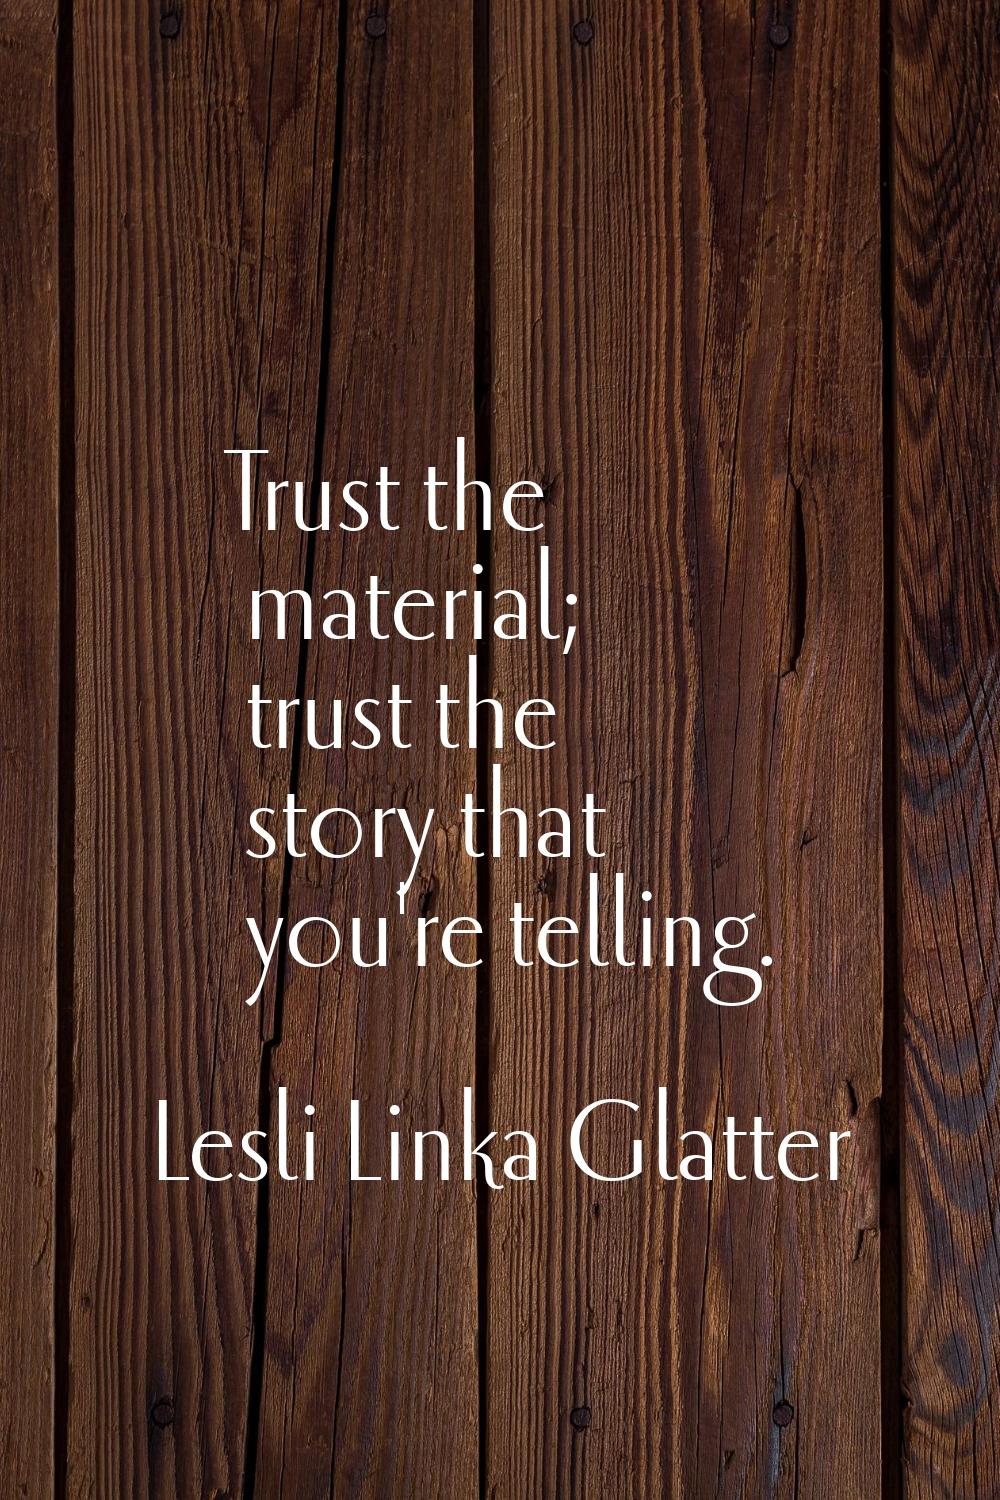 Trust the material; trust the story that you're telling.